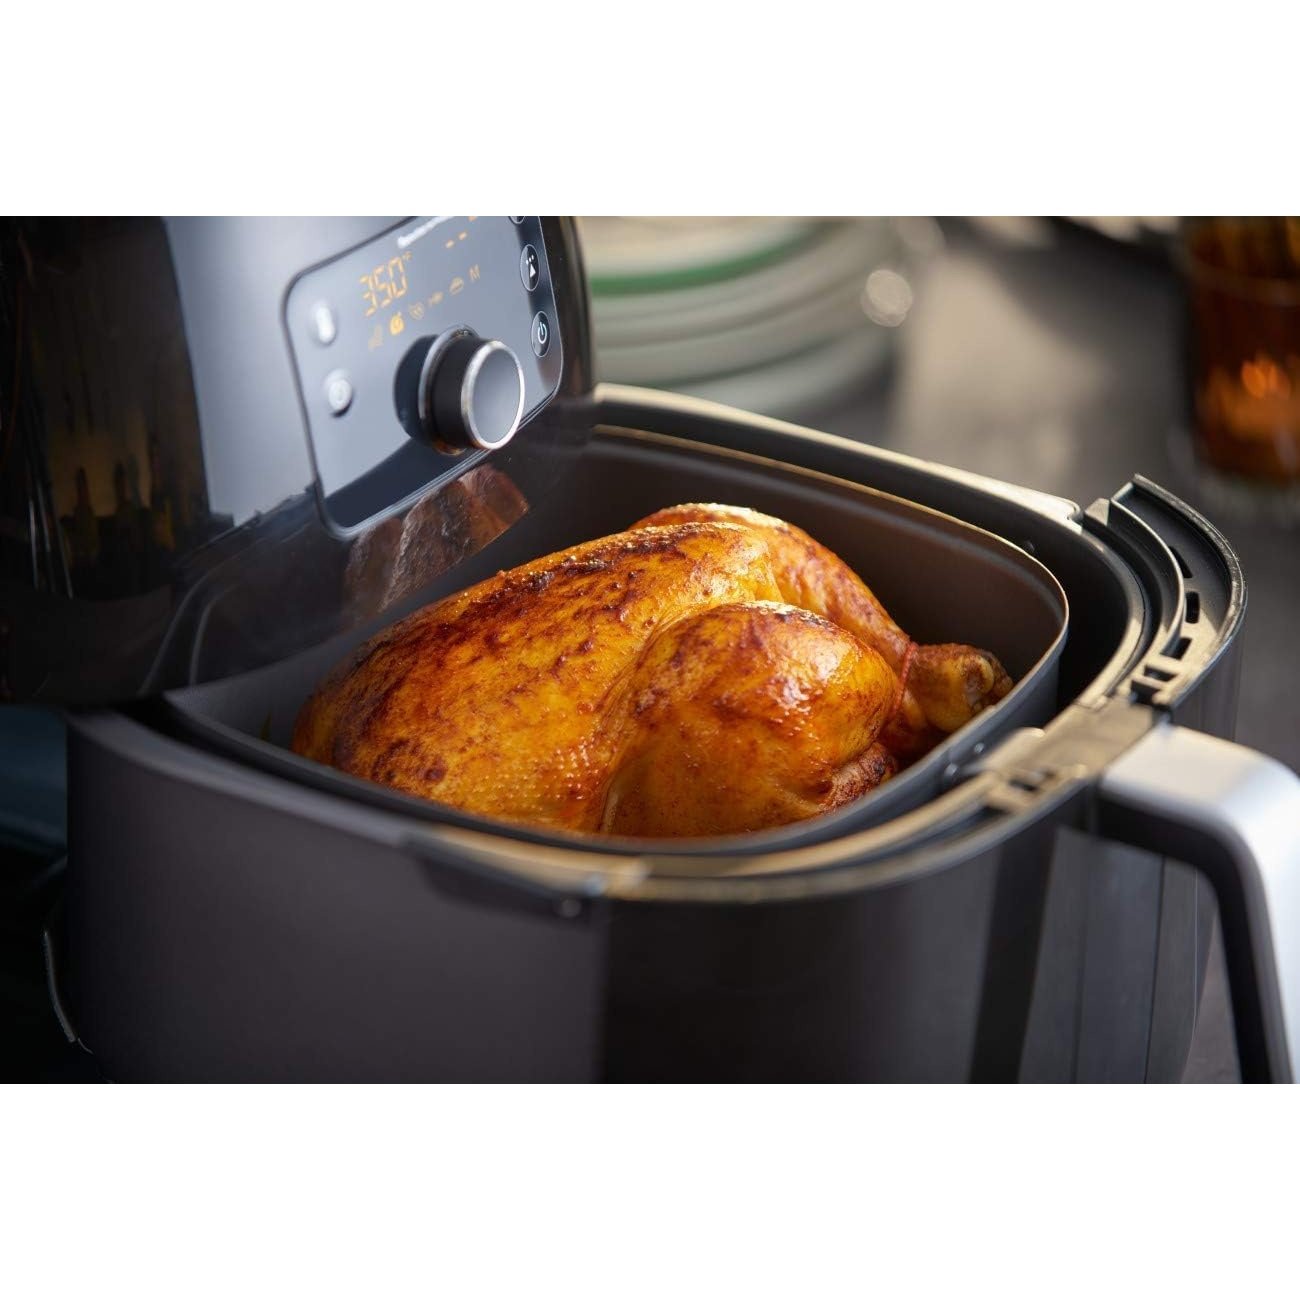 Philips Air Fryer 1425W - HD9216 | Supply Master Accra, Ghana Kitchen Appliances Buy Tools hardware Building materials